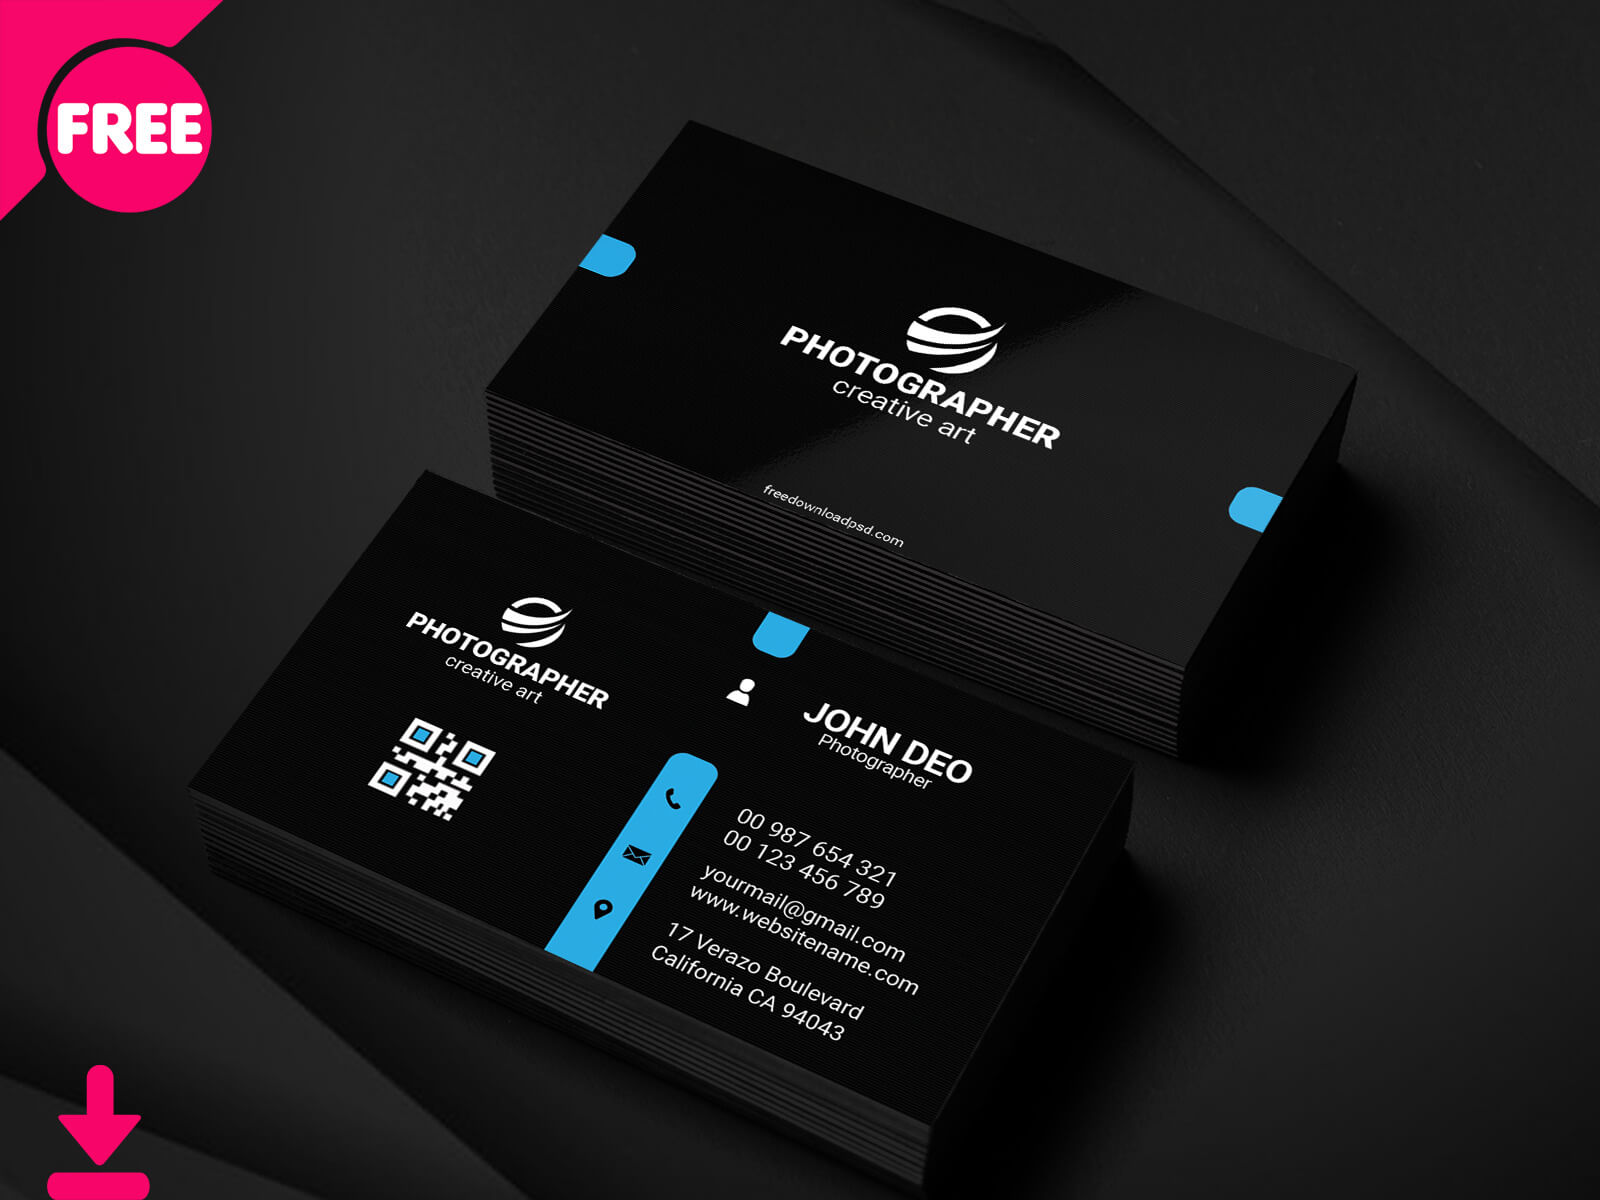 Free Personal Business Card Psd Template Coversheikh With Regard To Free Personal Business Card Templates